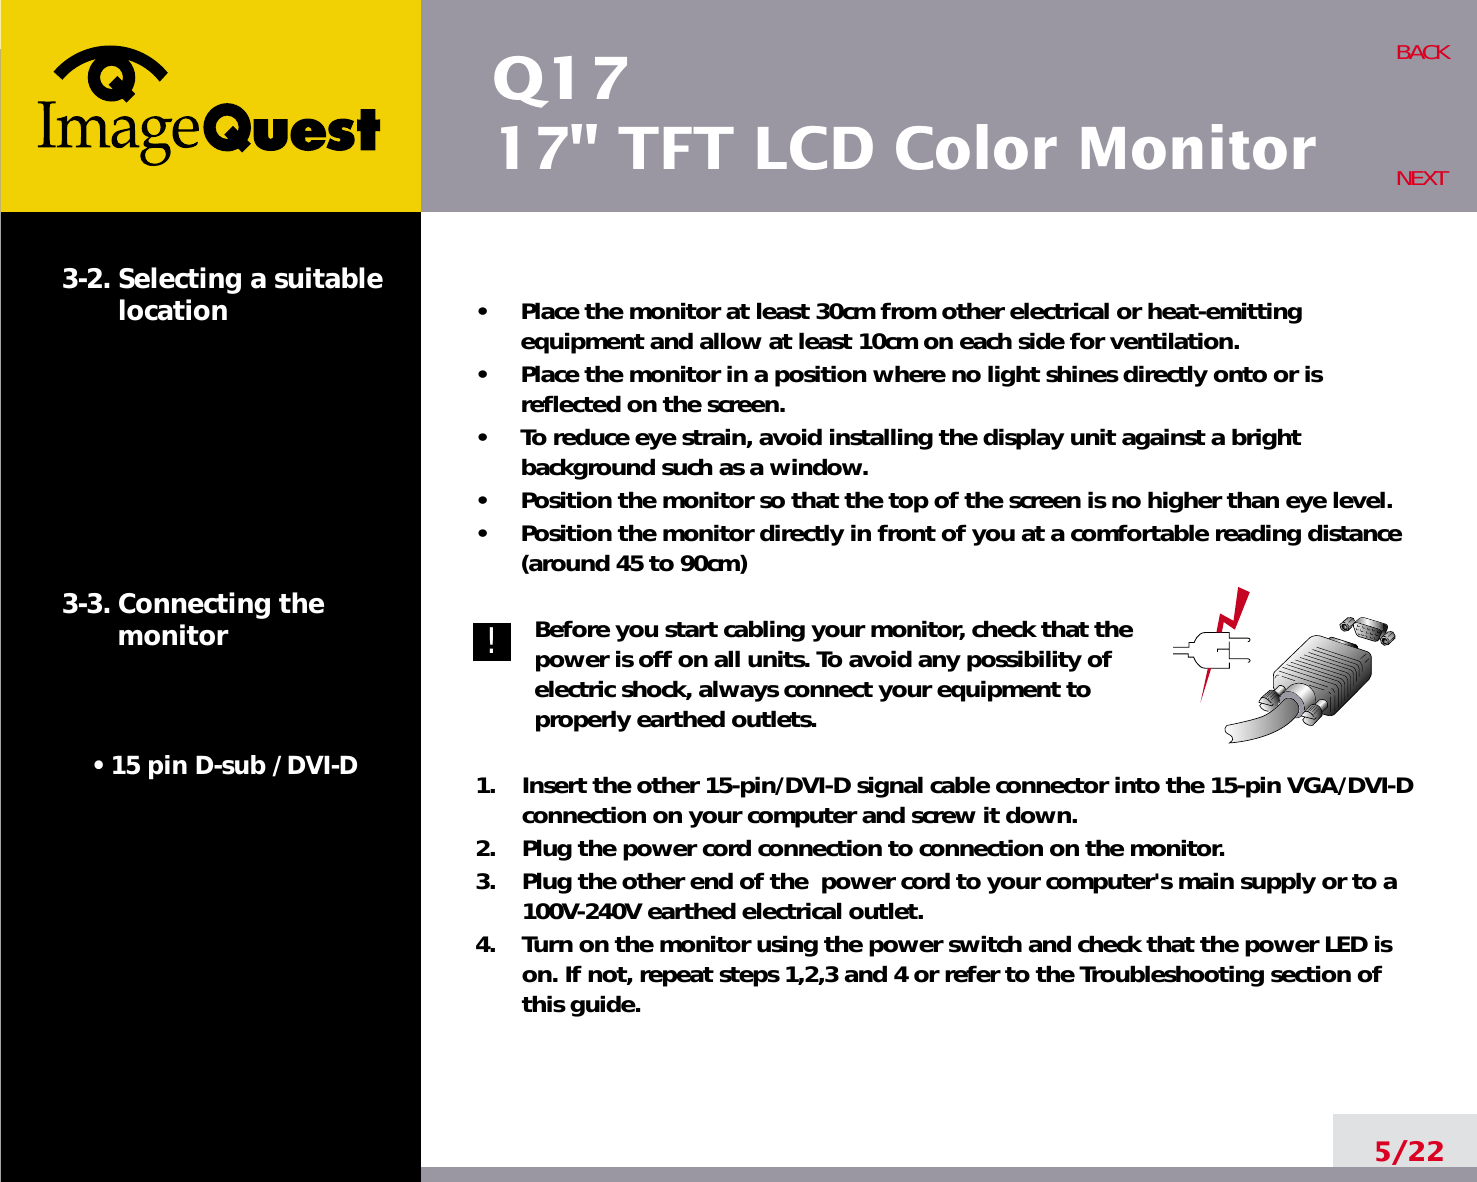 Q1717&quot; TFT LCD Color Monitor5/22BACKNEXT3-2. Selecting a suitablelocation3-3. Connecting the monitor• 15 pin D-sub / DVI-D            •     Place the monitor at least 30cm from other electrical or heat-emittingequipment and allow at least 10cm on each side for ventilation.•     Place the monitor in a position where no light shines directly onto or isreflected on the screen.•     To reduce eye strain, avoid installing the display unit against a brightbackground such as a window.•     Position the monitor so that the top of the screen is no higher than eye level.•     Position the monitor directly in front of you at a comfortable reading distance(around 45 to 90cm) Before you start cabling your monitor, check that thepower is off on all units. To avoid any possibility ofelectric shock, always connect your equipment toproperly earthed outlets.1.    Insert the other 15-pin/DVI-D signal cable connector into the 15-pin VGA/DVI-Dconnection on your computer and screw it down. 2.    Plug the power cord connection to connection on the monitor.3.    Plug the other end of the  power cord to your computer&apos;s main supply or to a100V-240V earthed electrical outlet.4.    Turn on the monitor using the power switch and check that the power LED ison. If not, repeat steps 1,2,3 and 4 or refer to the Troubleshooting section ofthis guide.!!